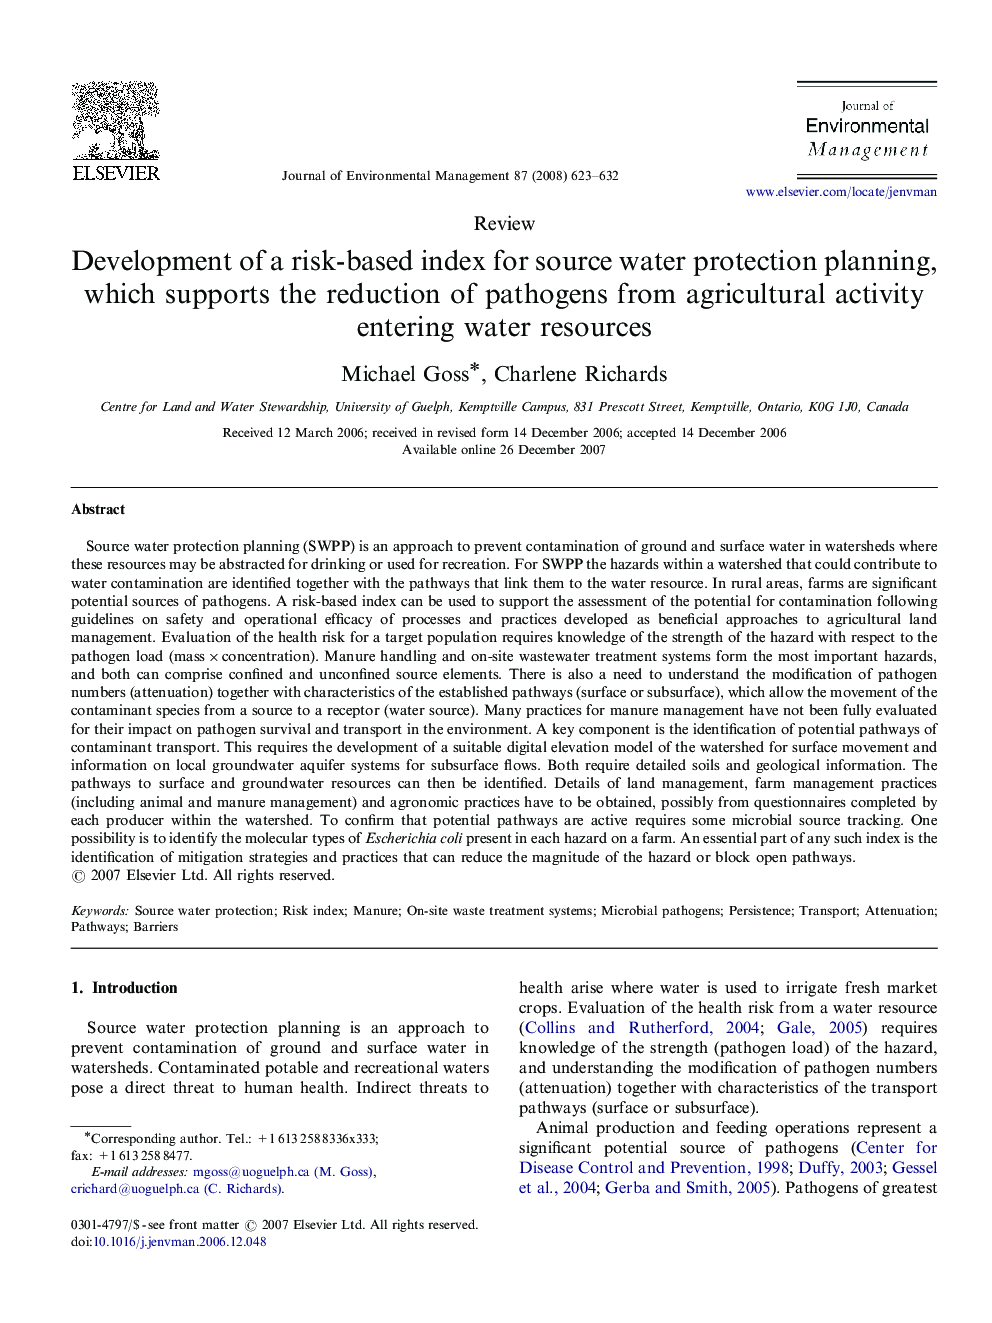 Development of a risk-based index for source water protection planning, which supports the reduction of pathogens from agricultural activity entering water resources